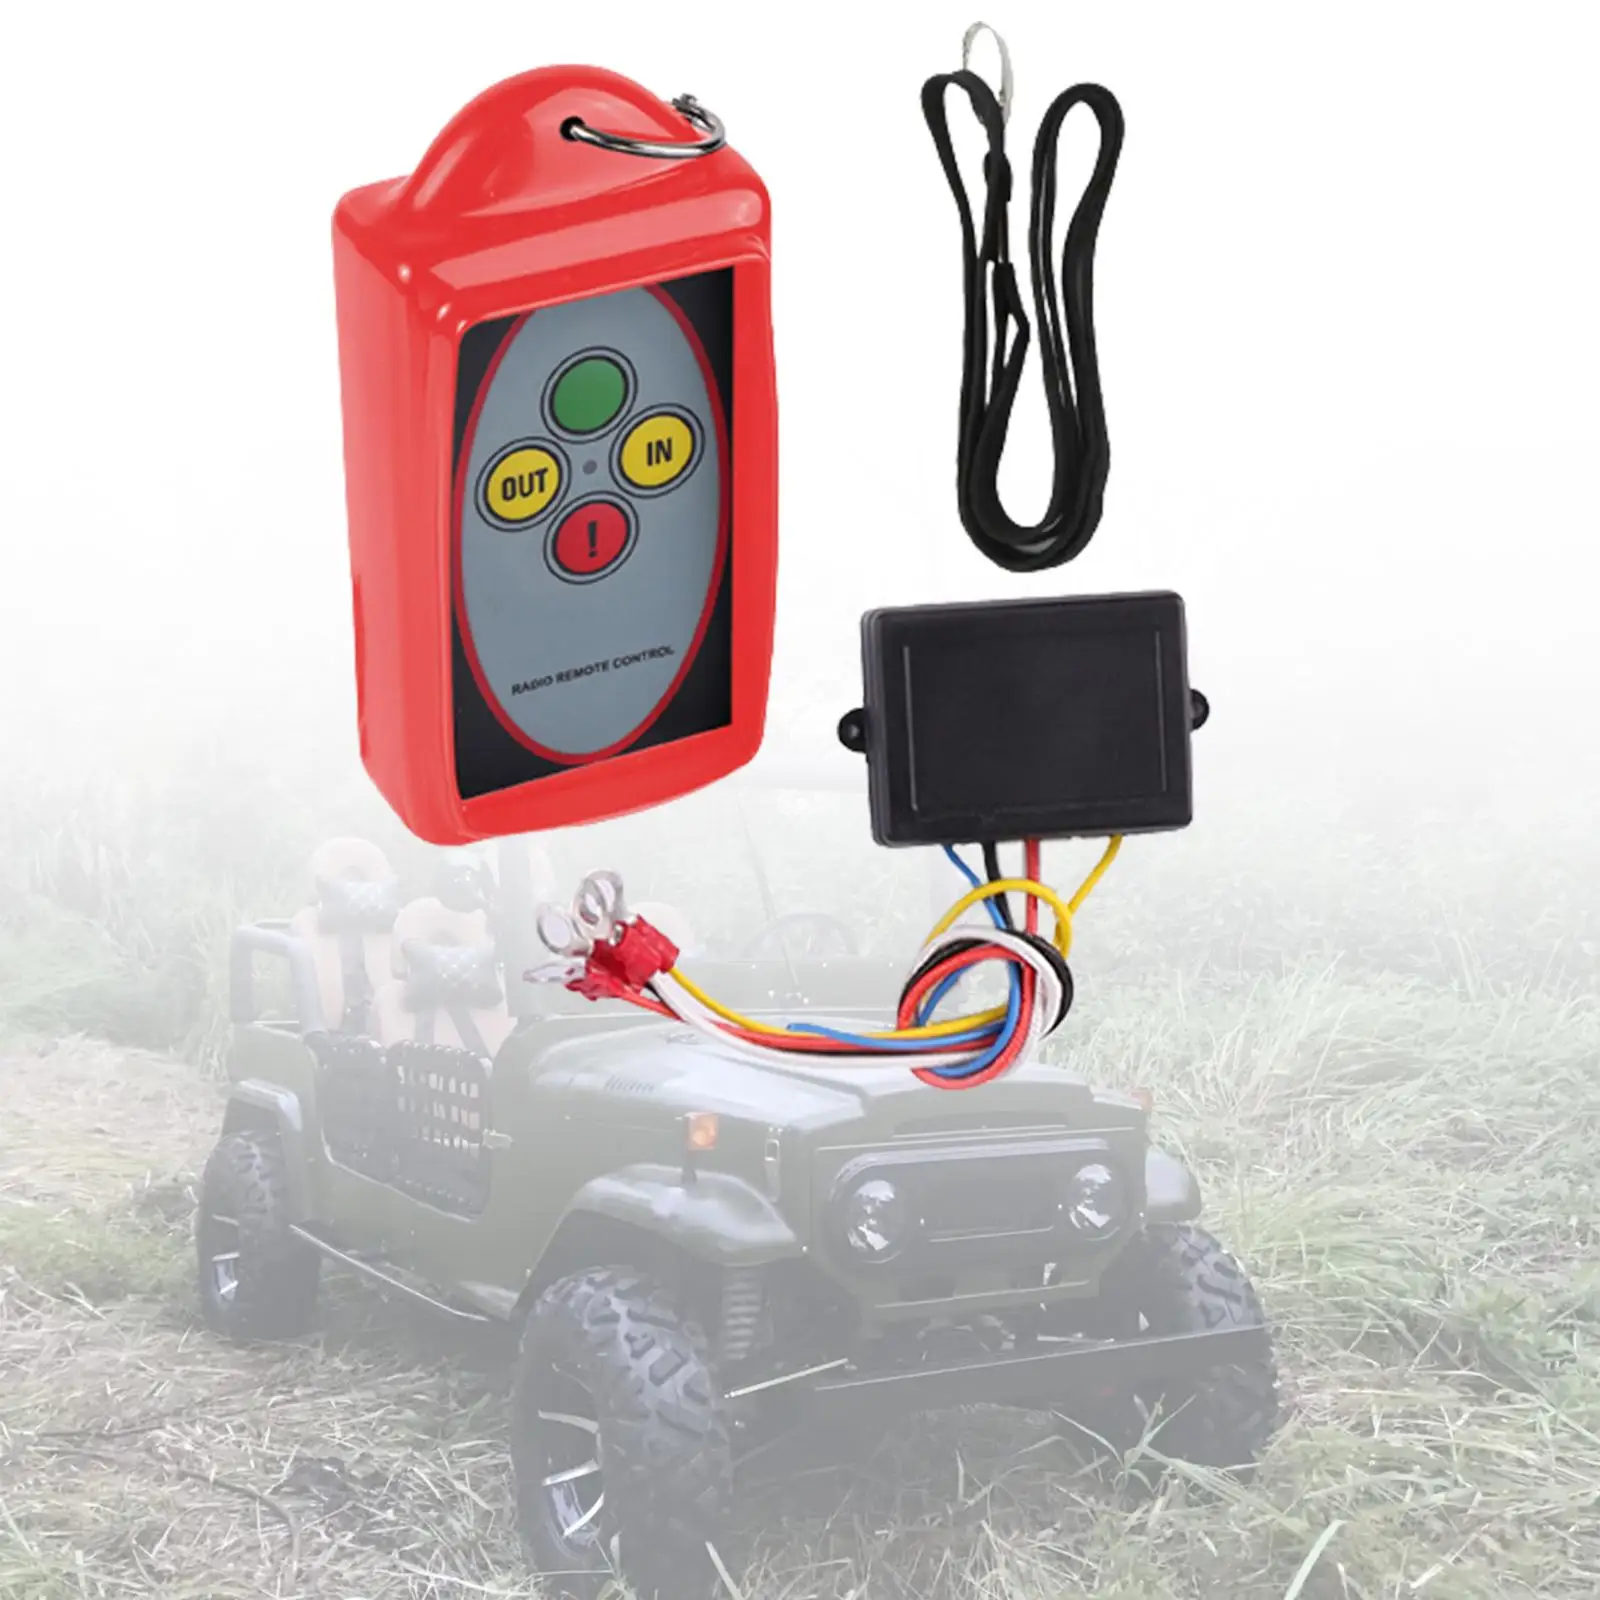 Wireless Winch Remote Control Kit Repair 75ft High Performance Durable Replaces Accessories for ATV Vehicle UTV SUV Truck